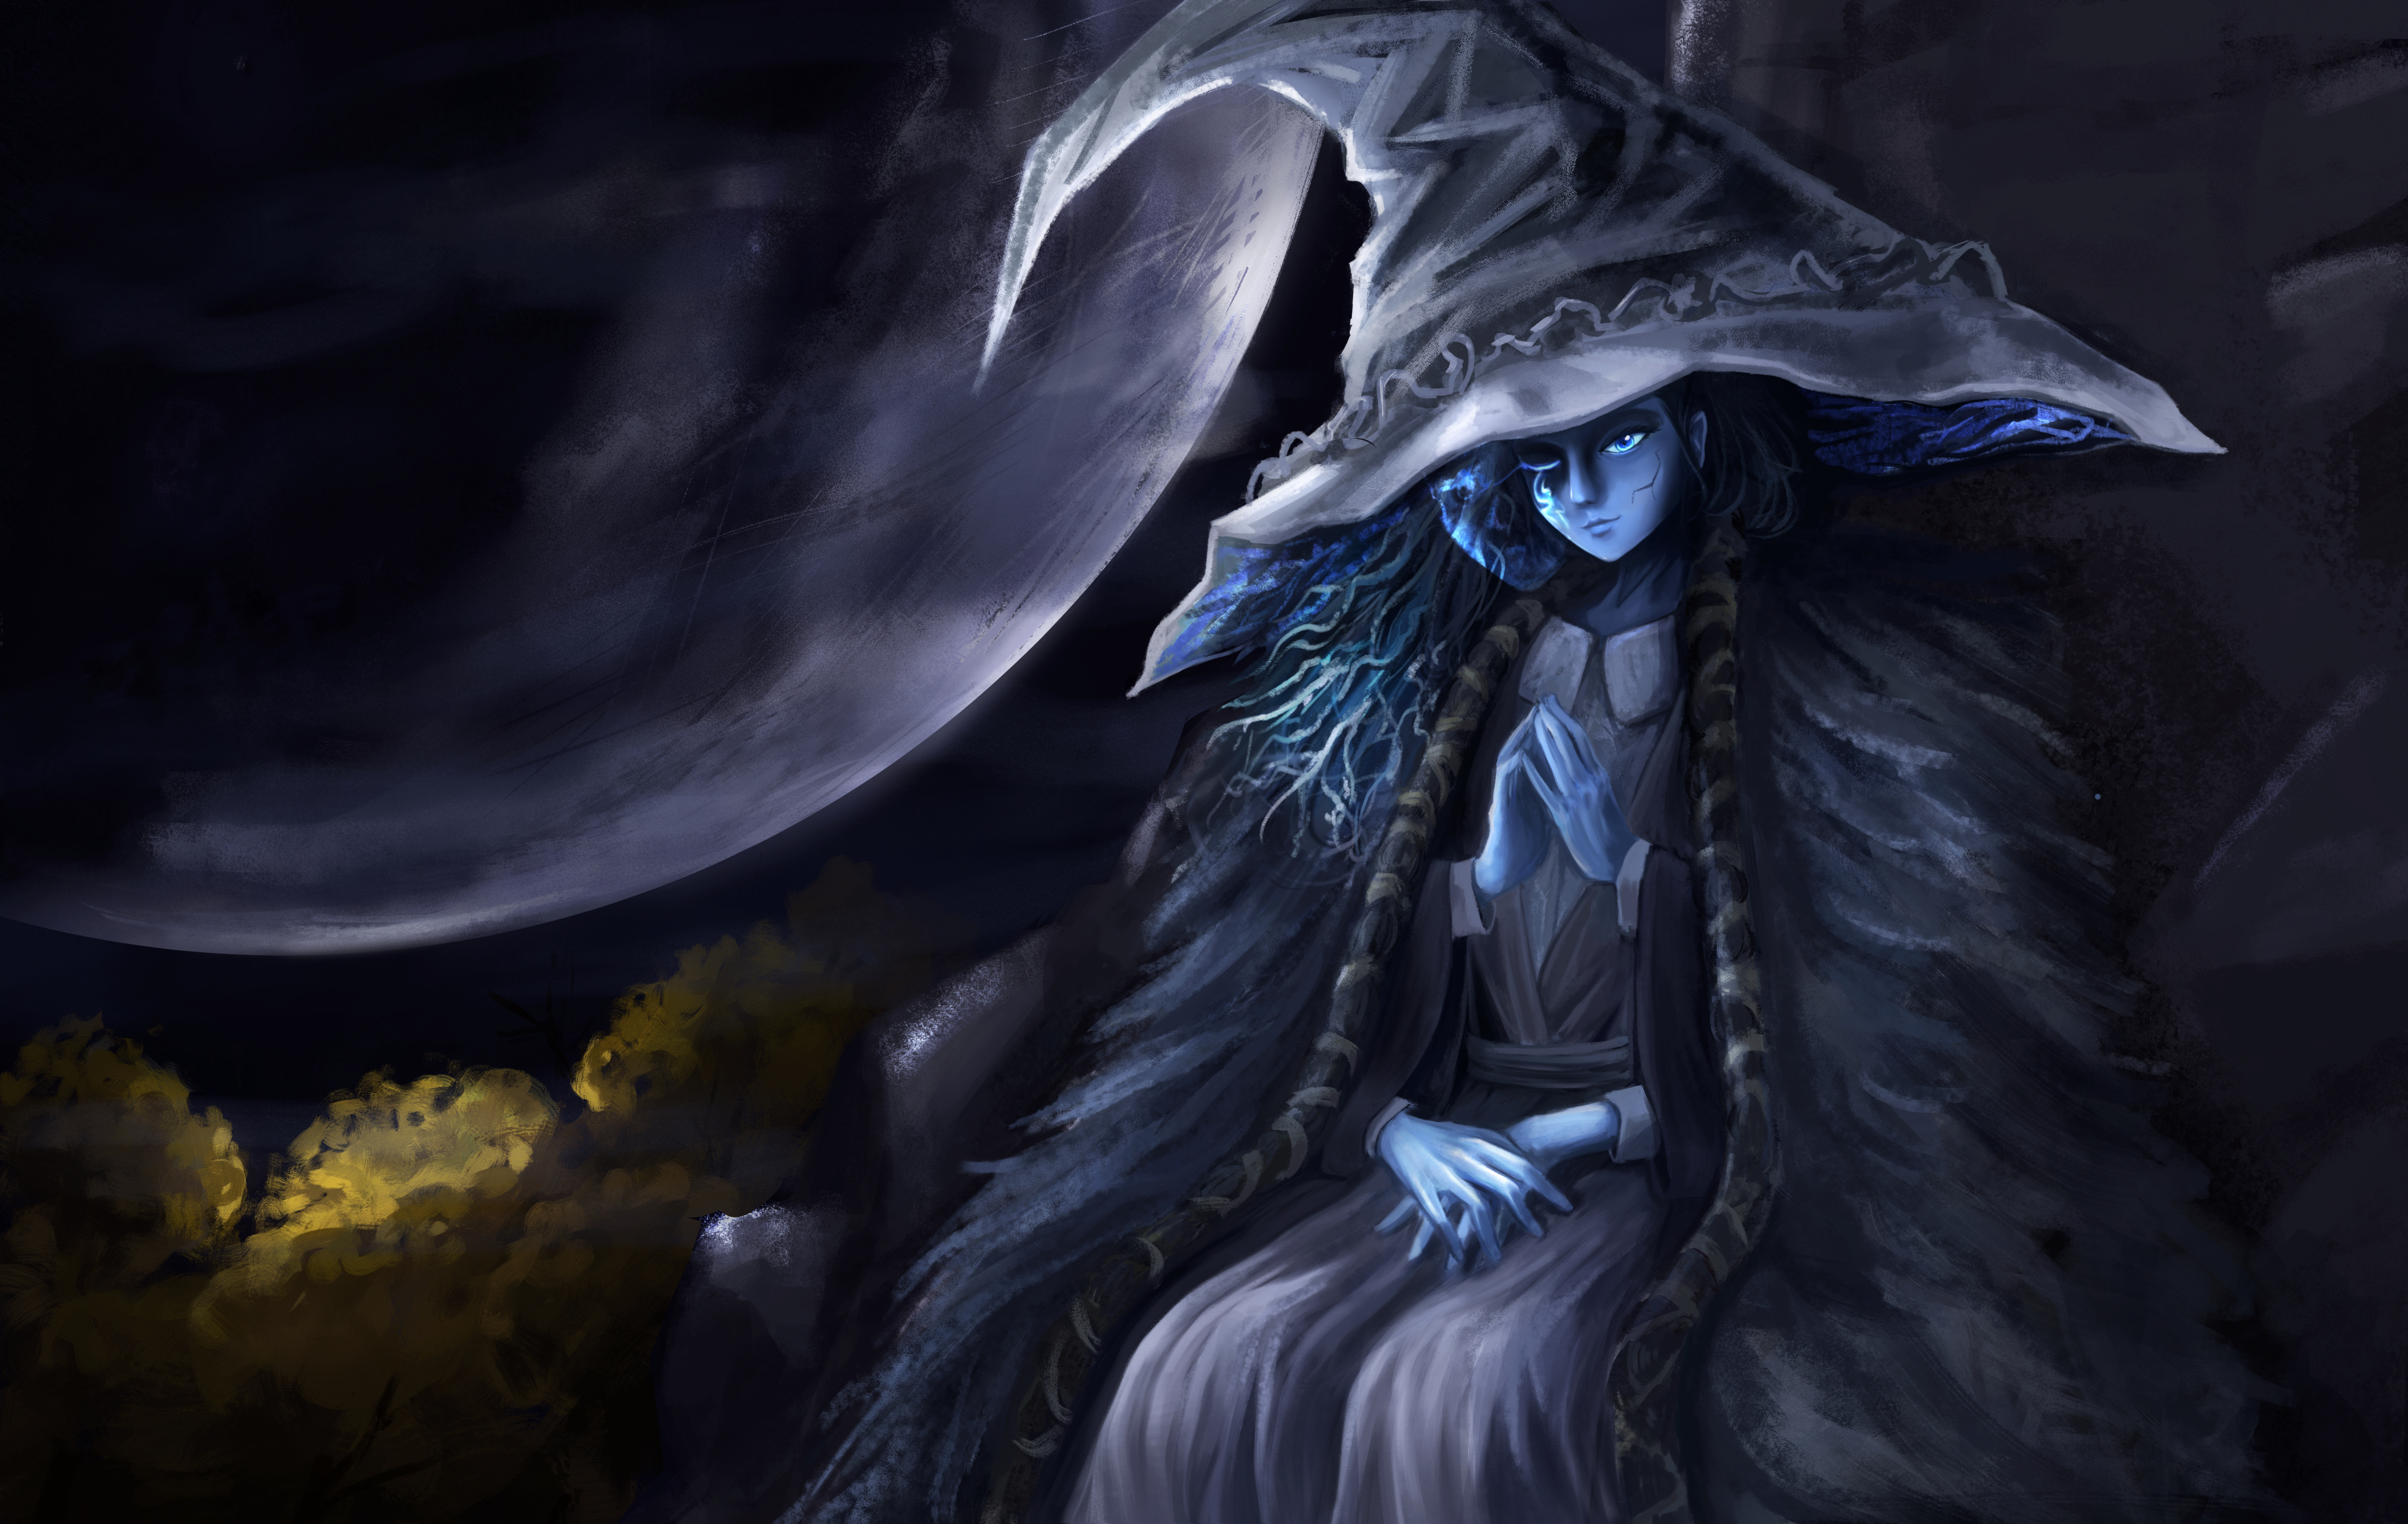 Ranni The Witch - Desktop Wallpapers, Phone Wallpaper, PFP, Gifs